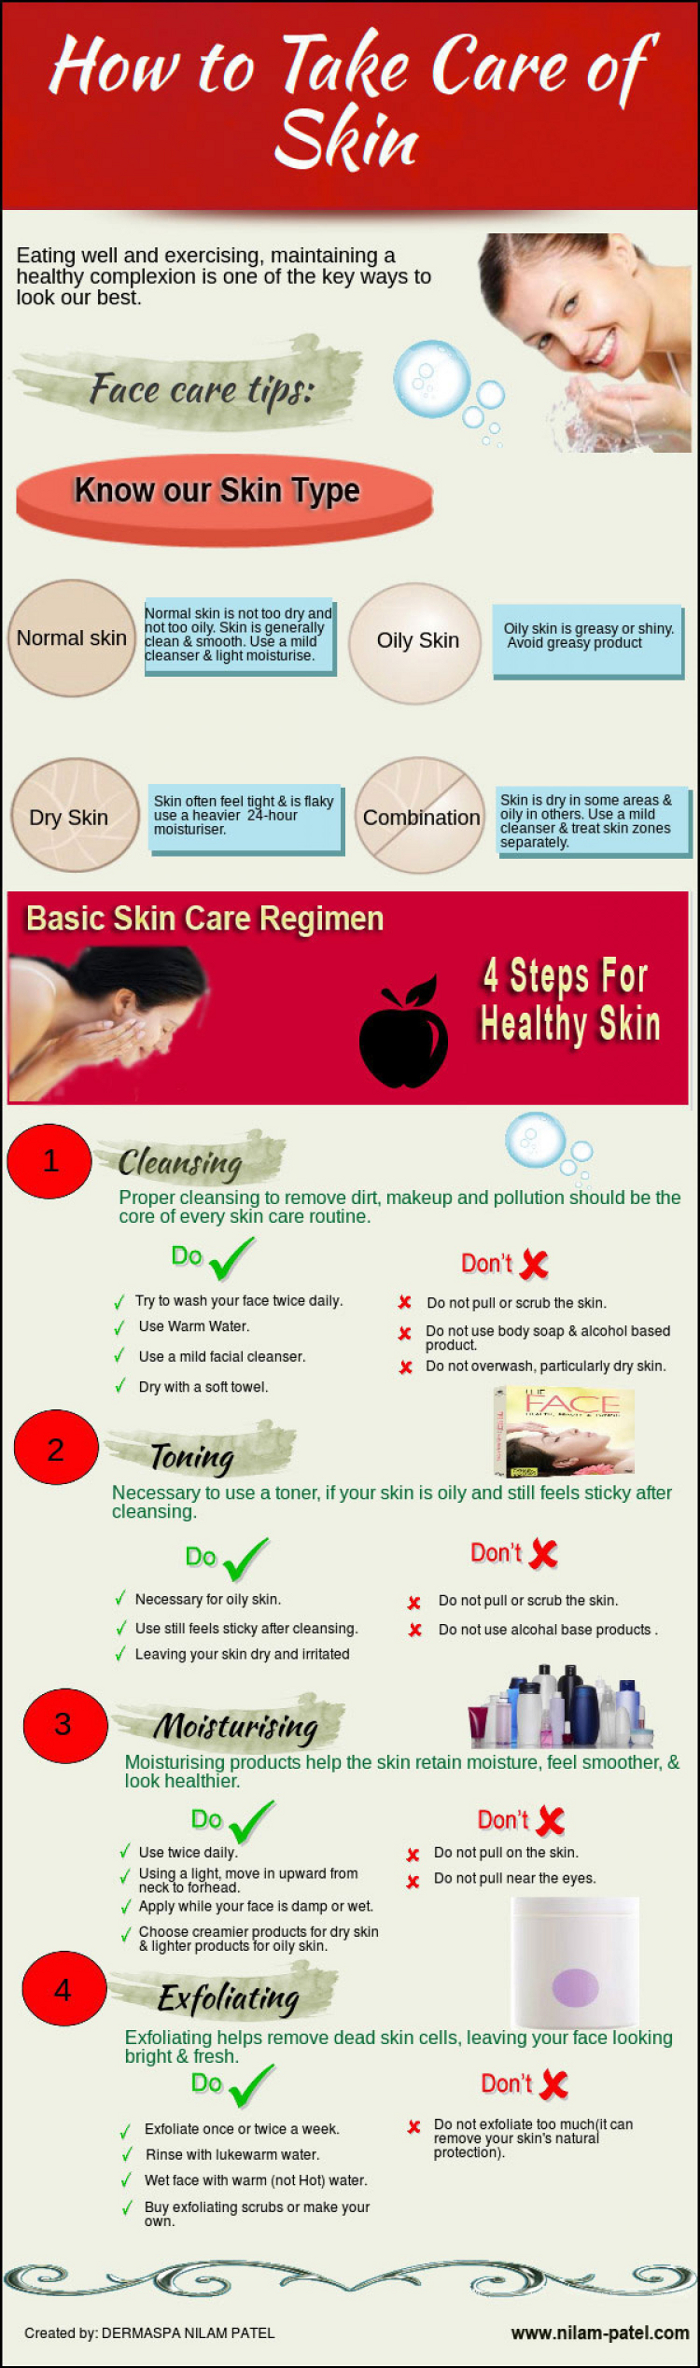 Guide to Taking Care of Skin